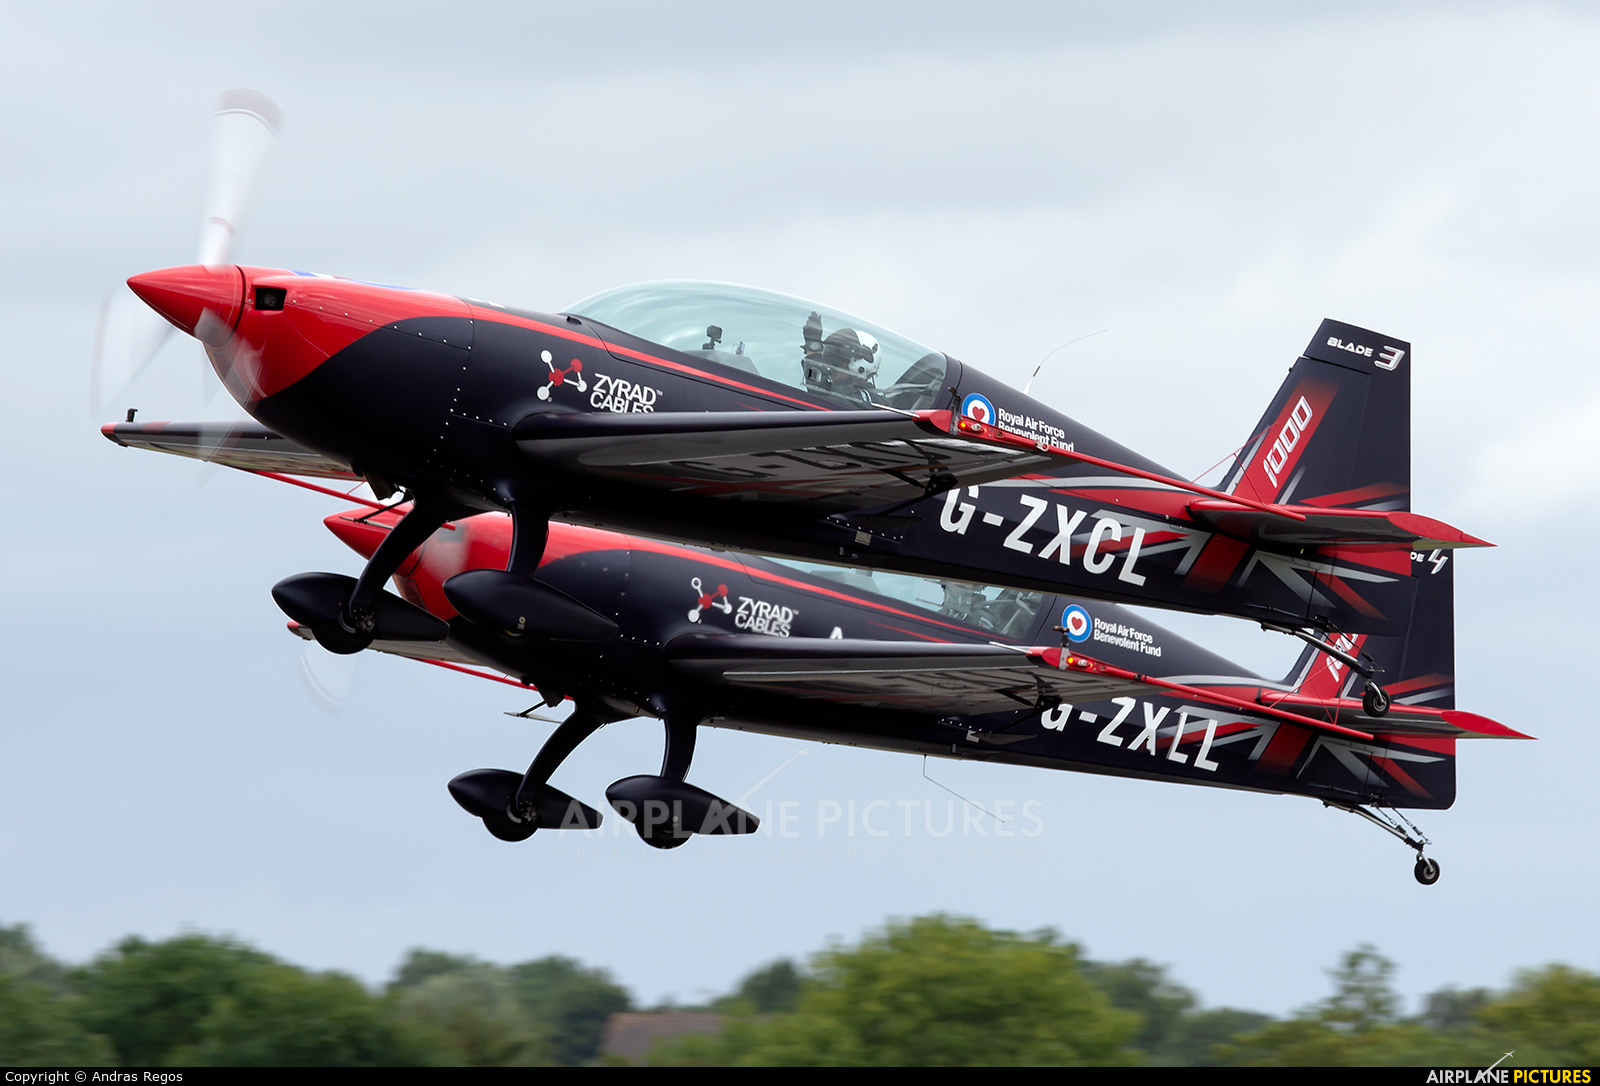 2 Excel Aviation "The Blades Aerobatic Team" G-ZXCL aircraft at Fairford